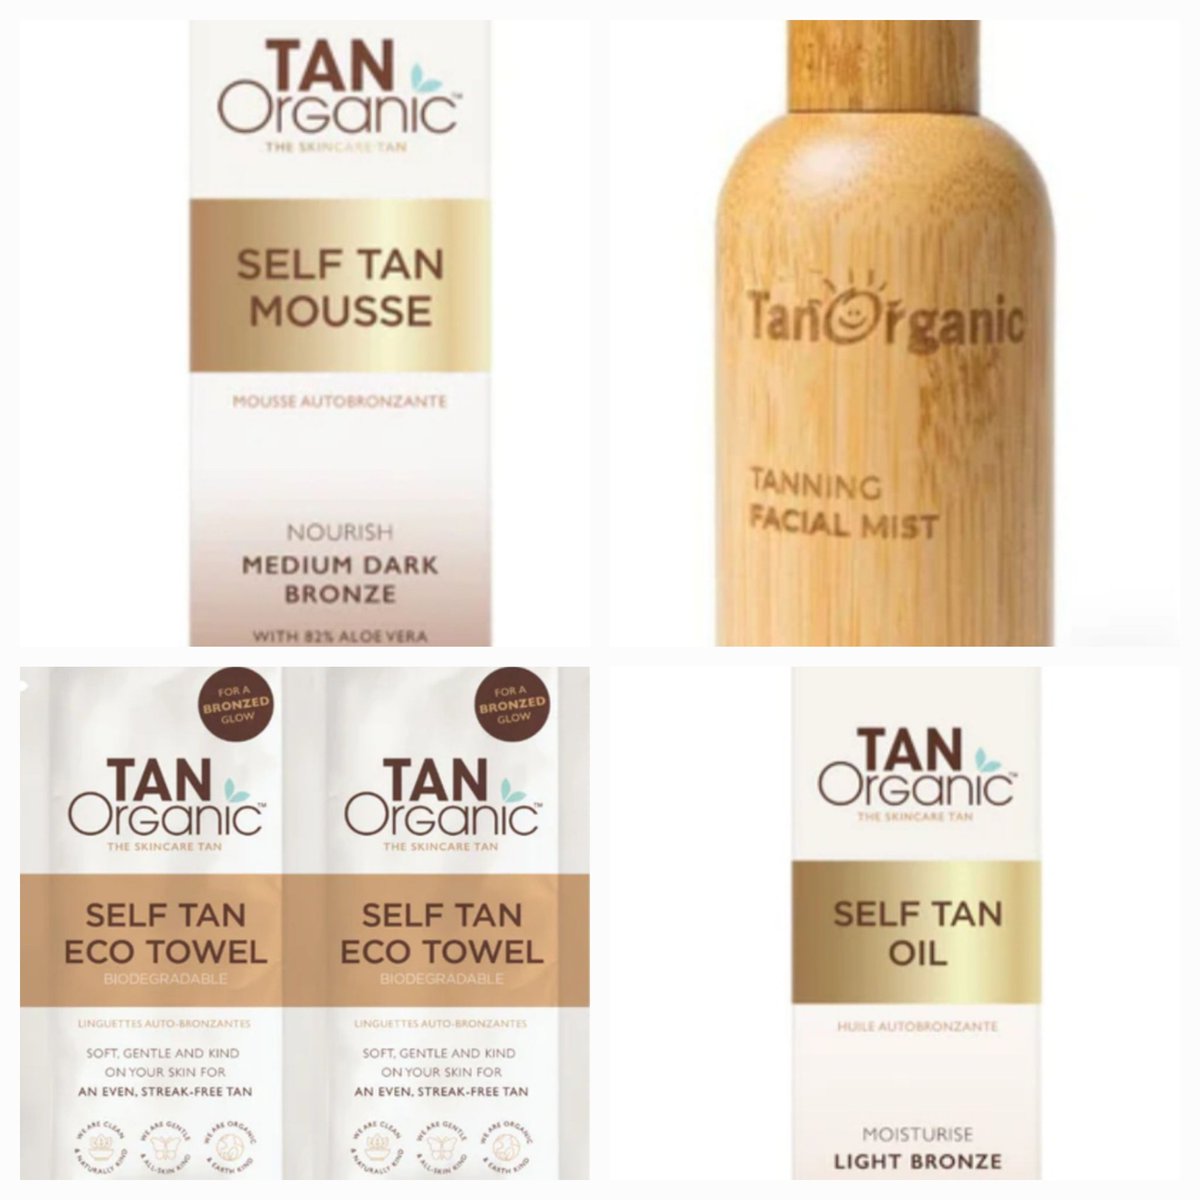 Some of our faves from @TanOrganic Perfect for creating a natural looking tan - an ideal pick me up in this dreary weather!!! #Tanorganic #NaturalTan #aunatural #ad #TanningAtHome #bronzedskin #sp #kindbrandcompany #gifted